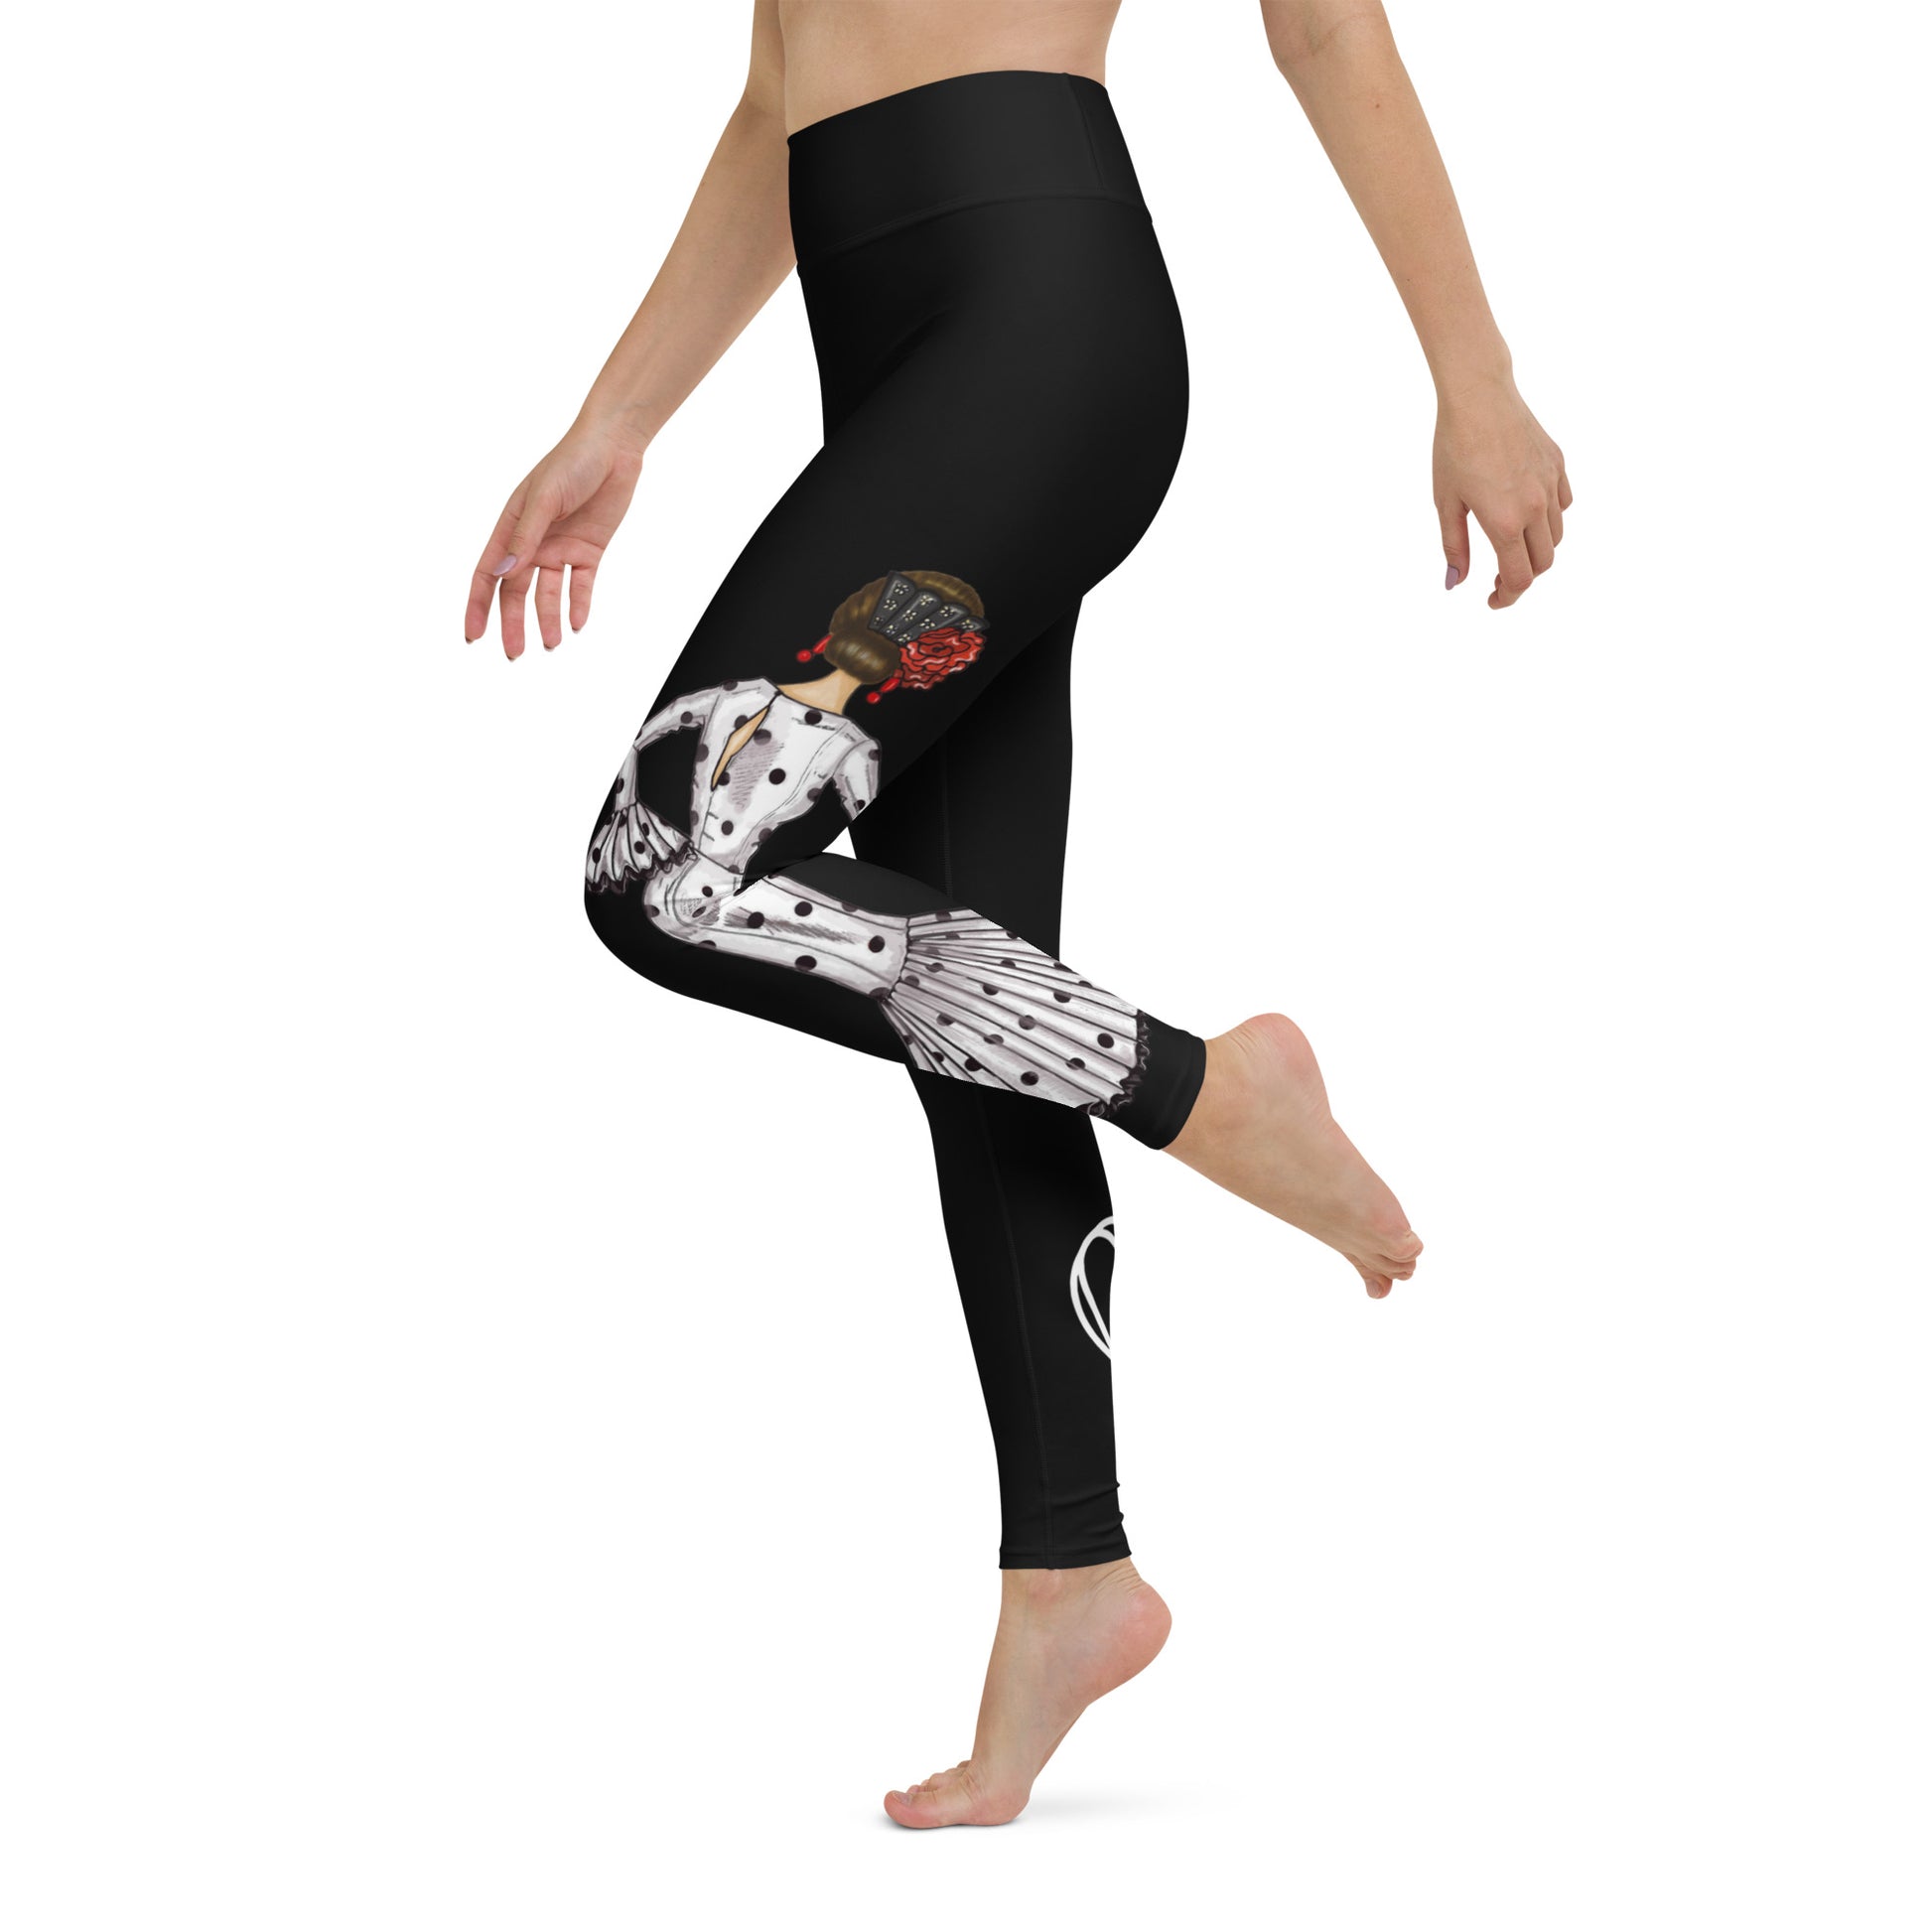 Flamenco Dancer Leggings, black  high waisted yoga leggings with a white dress design with black polka dots and red hearts. - IllustrArte